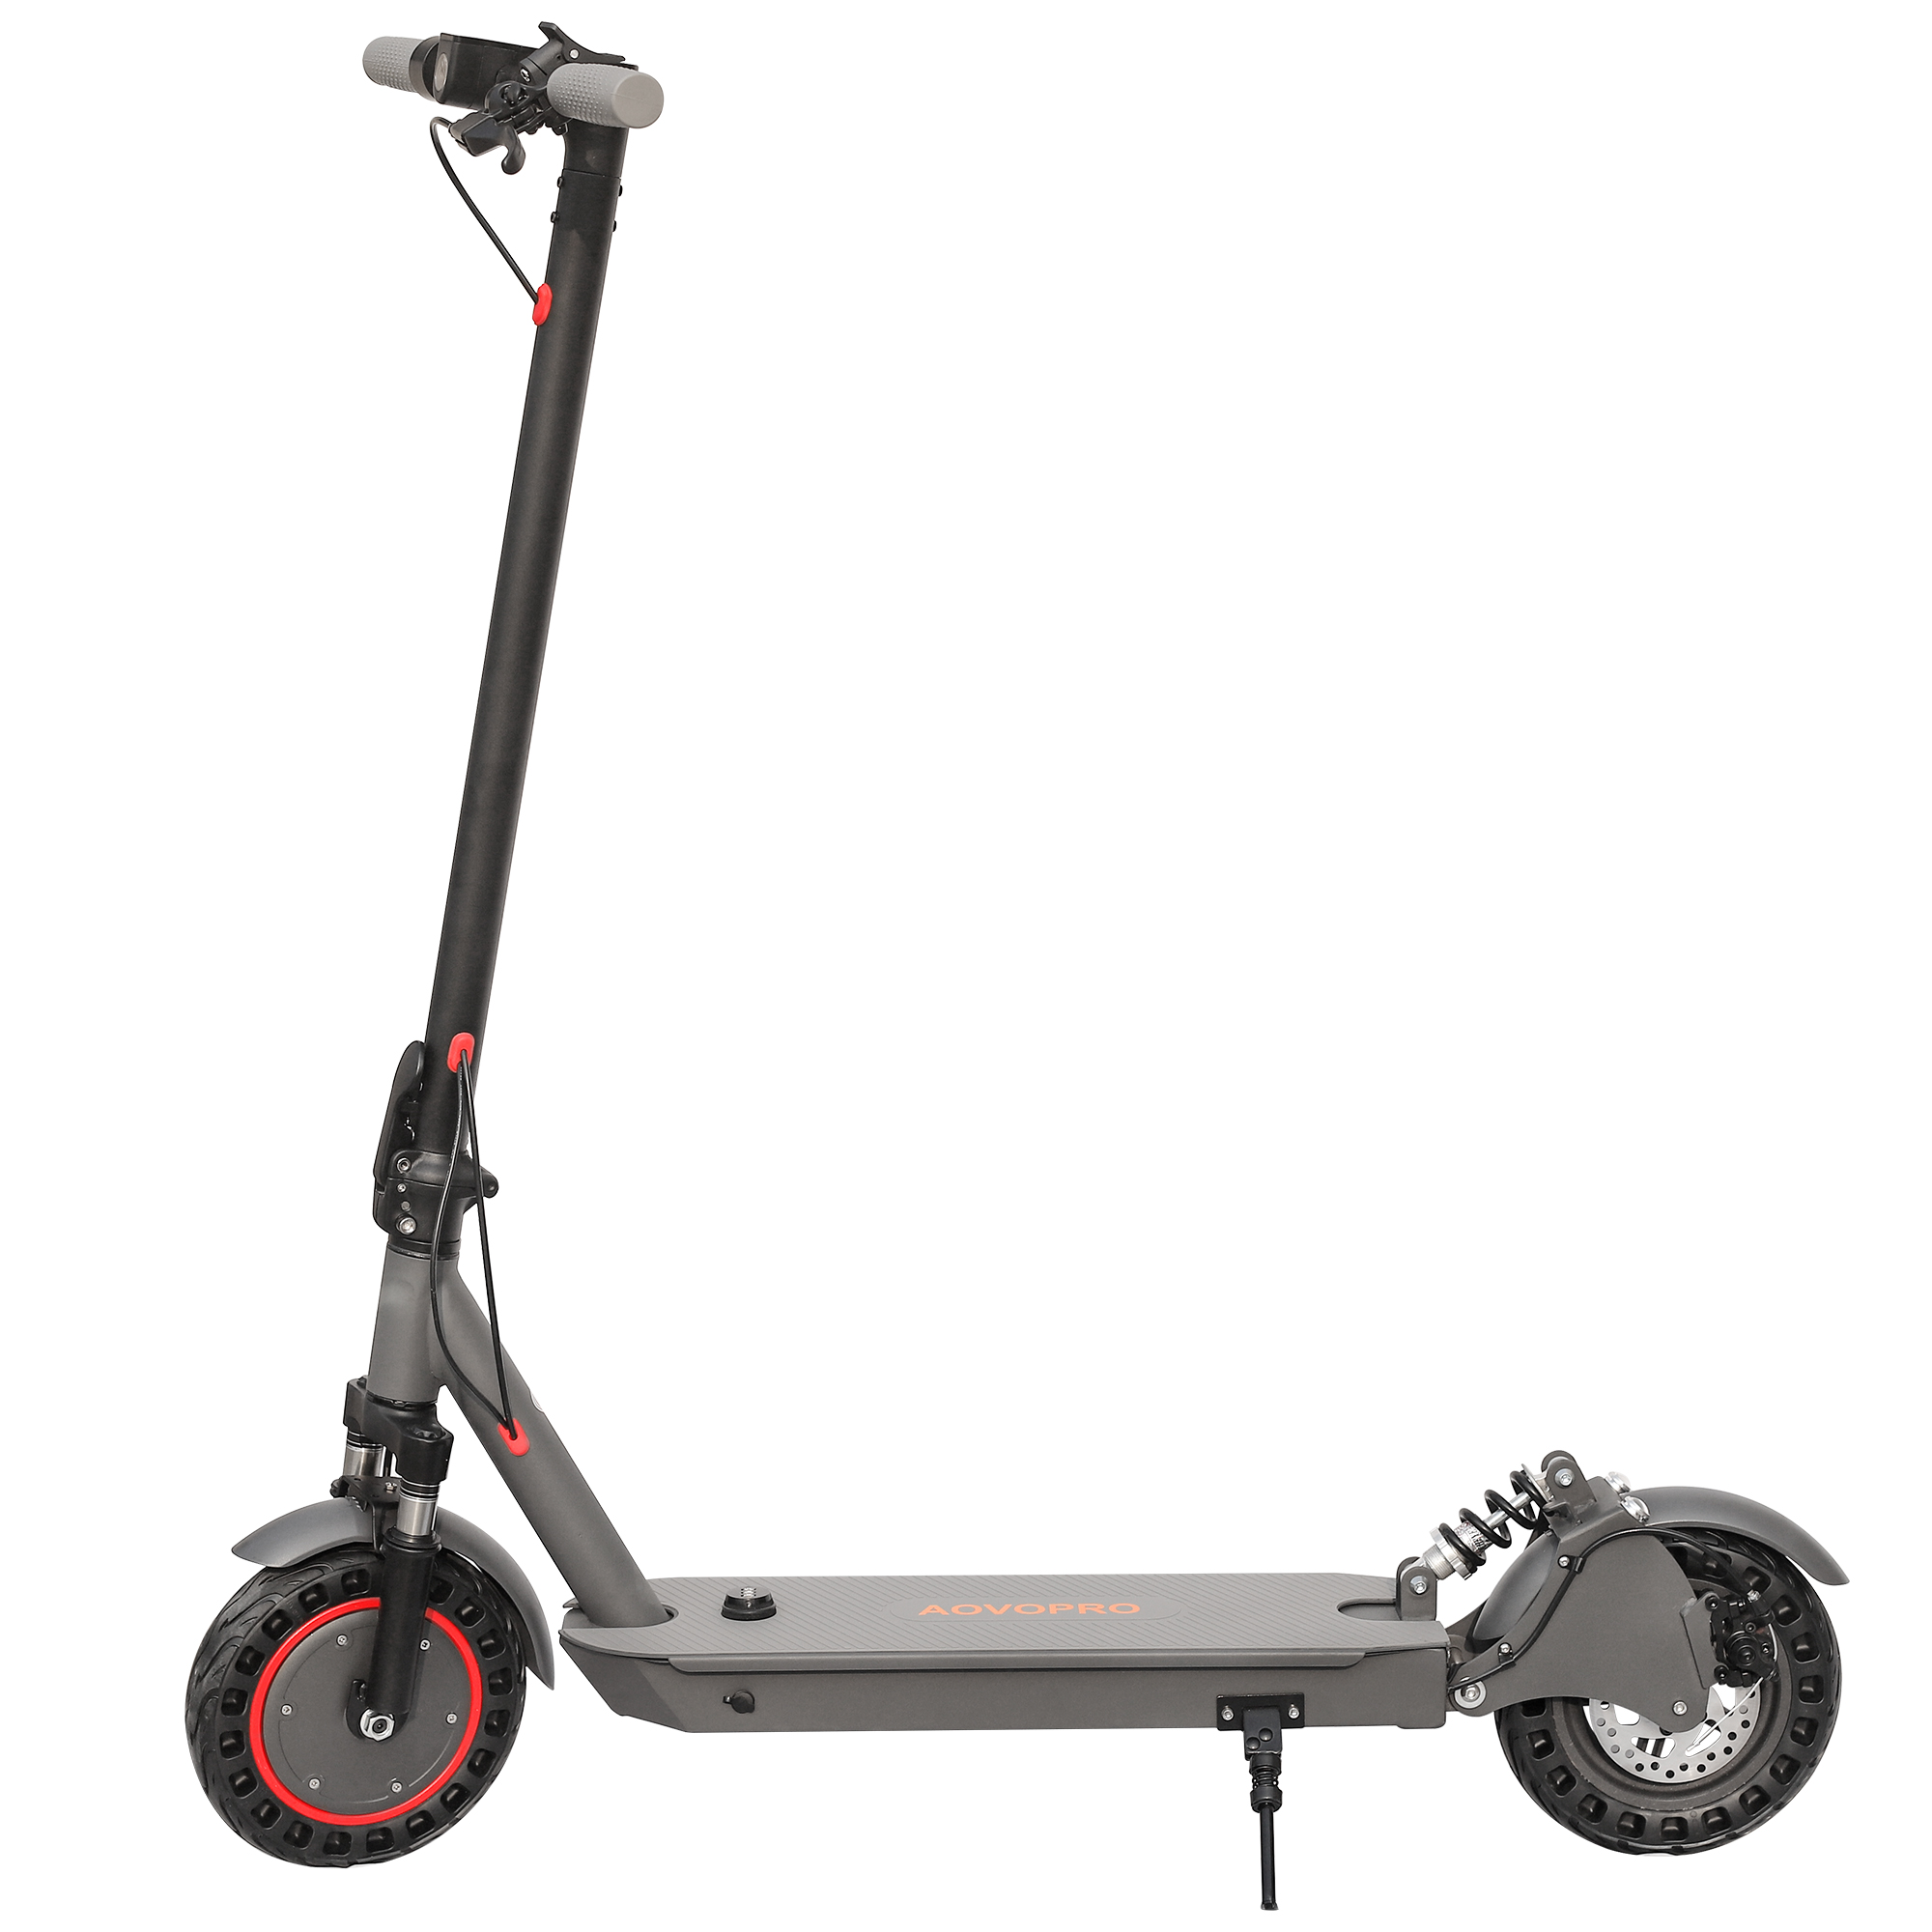 Find EU Direct AOVOPRO ESMAX 36V 18Ah 350W 10in Folding Electric Scooter 25km/h Top Speed 120kg Max Load Speed E Scooter for Sale on Gipsybee.com with cryptocurrencies